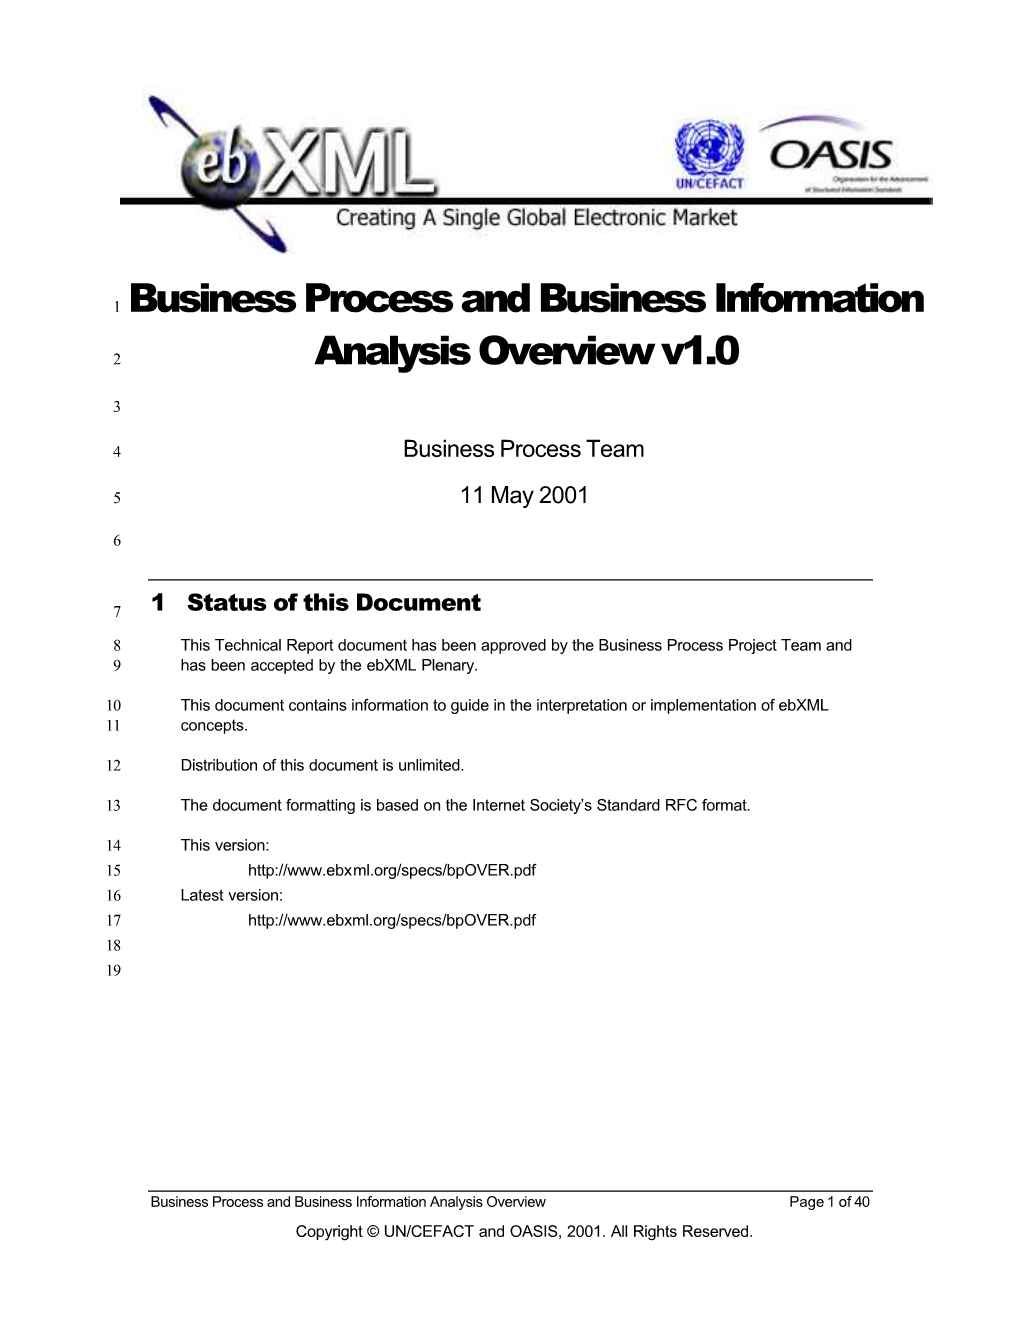 Business Process and Business Information Analysis Overview V1.0